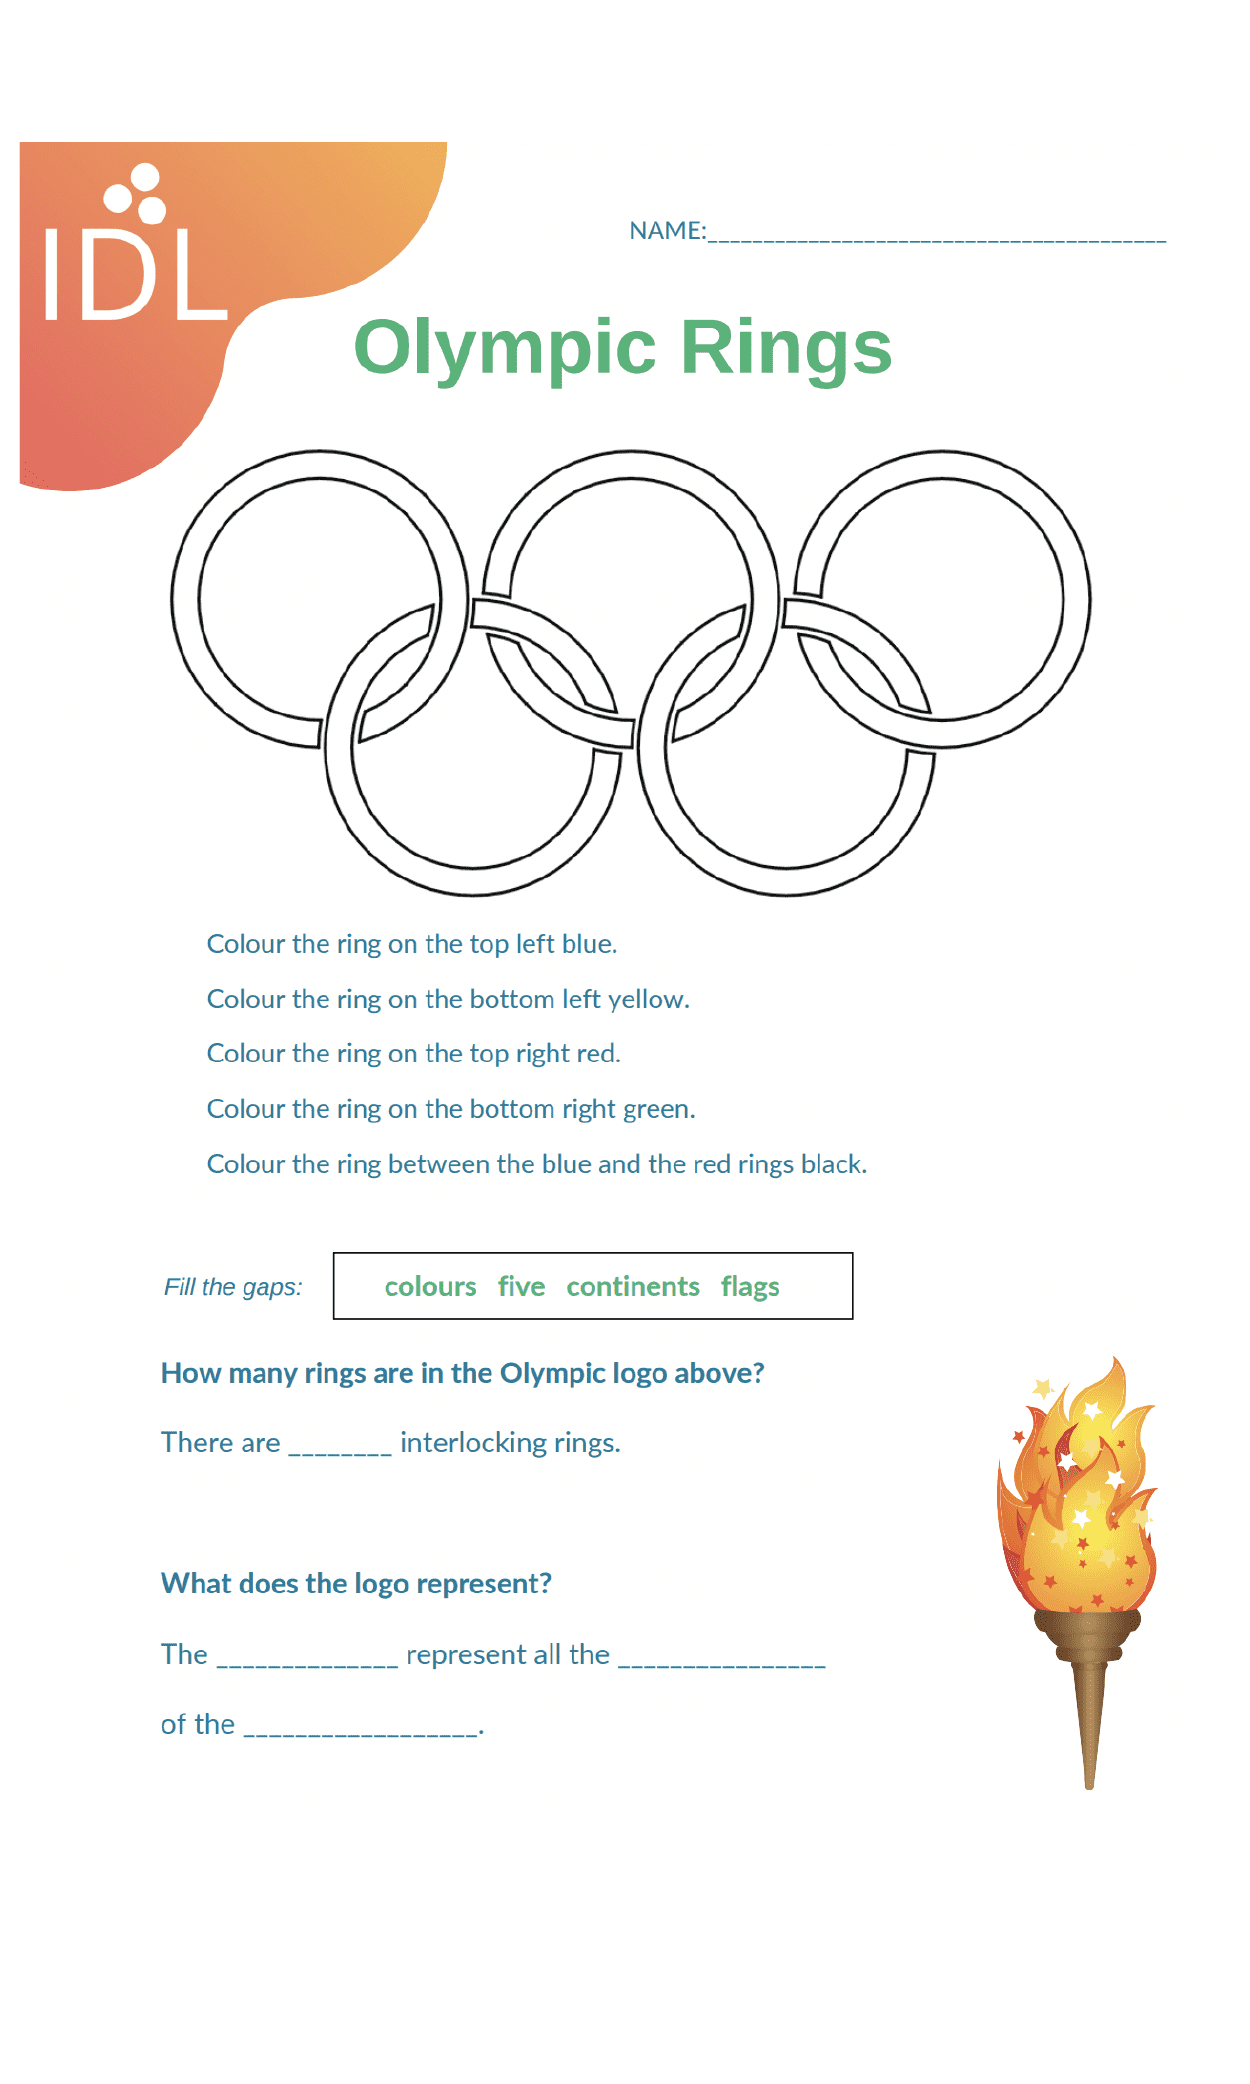 Olympics-Colouring-and-Gap-Filling-Worksheet